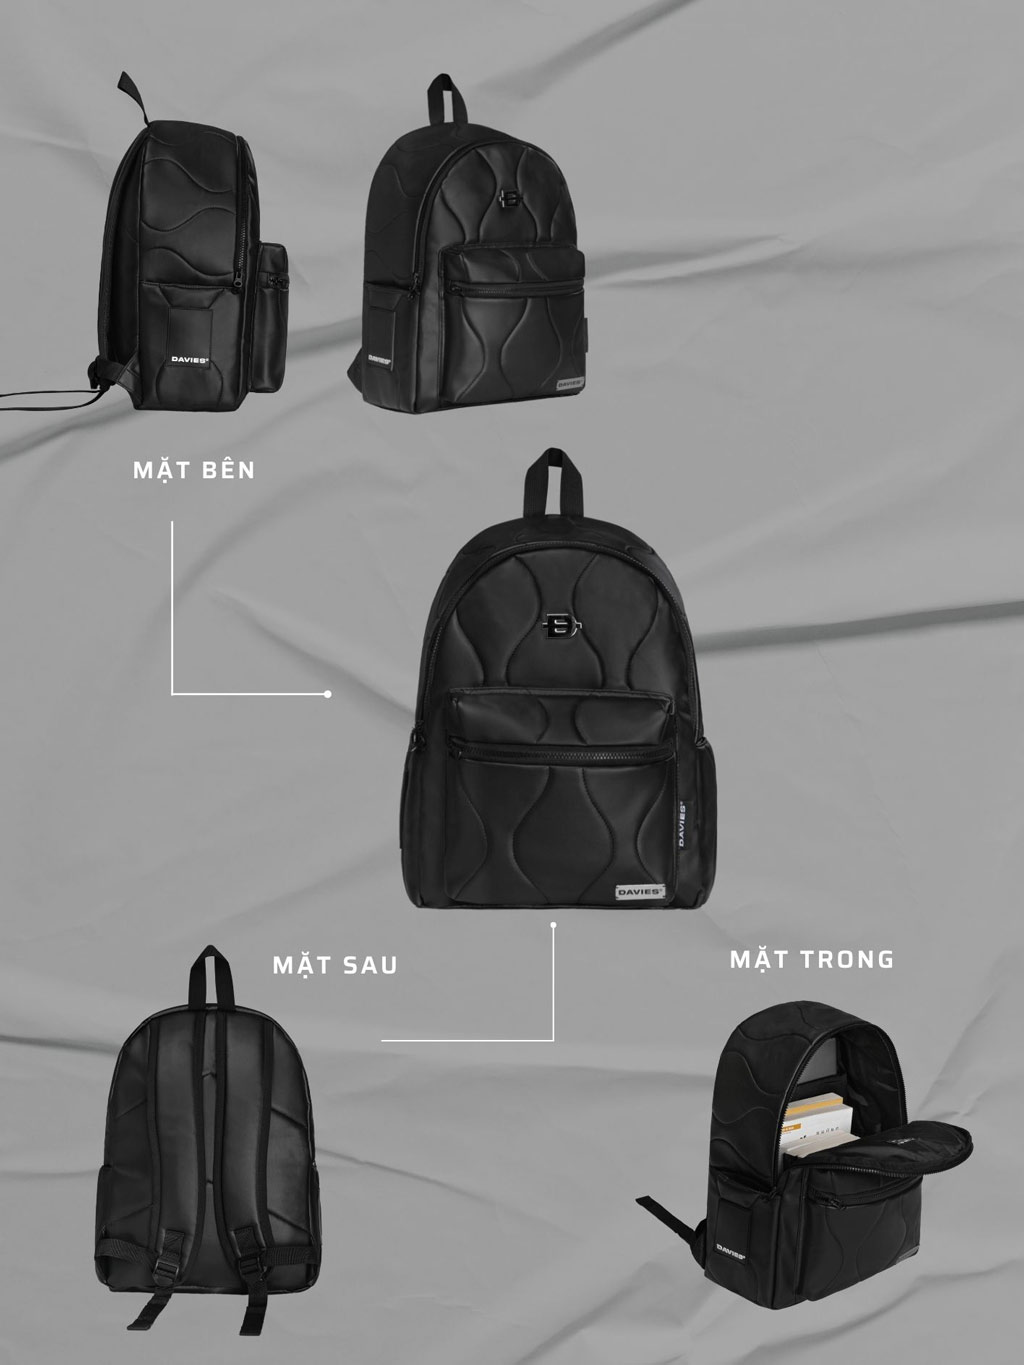 DSW Air Backpack